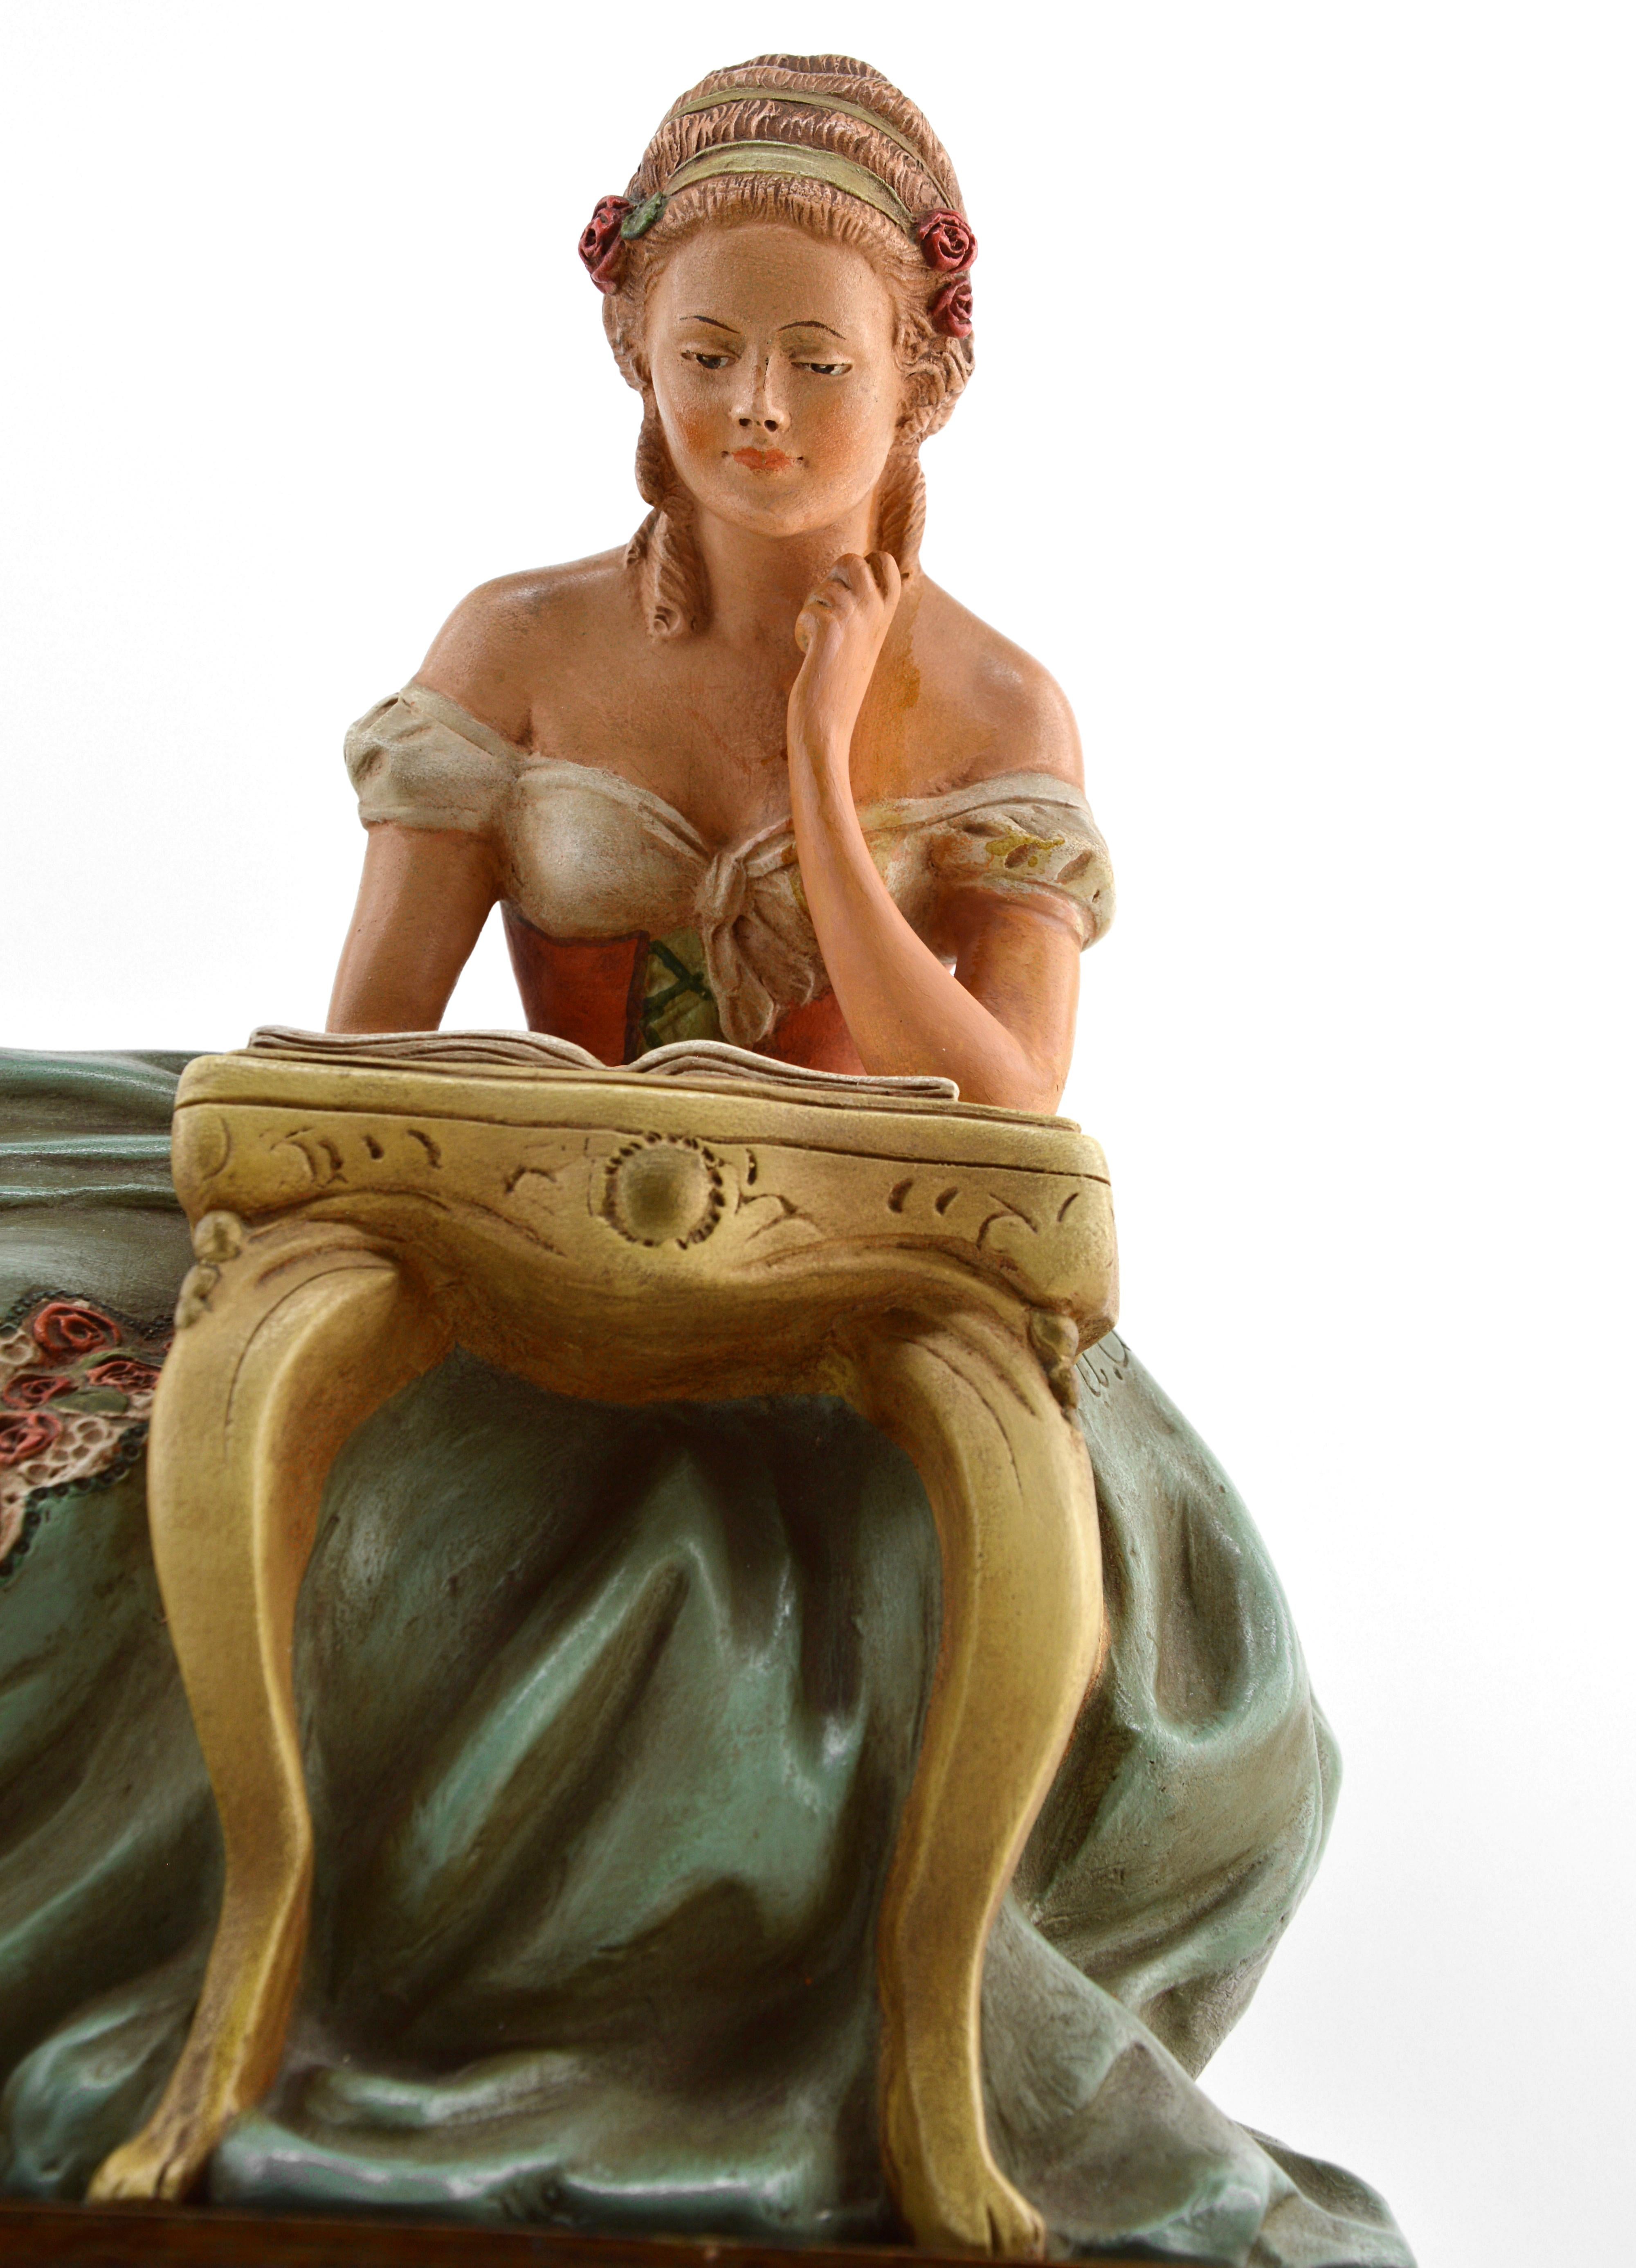 French Art Deco terracotta statue by Ugo Cipriani (1887-1960), France, 1940s. Lady reading. Polychrome patina. Macassar base. Measures: Width 15